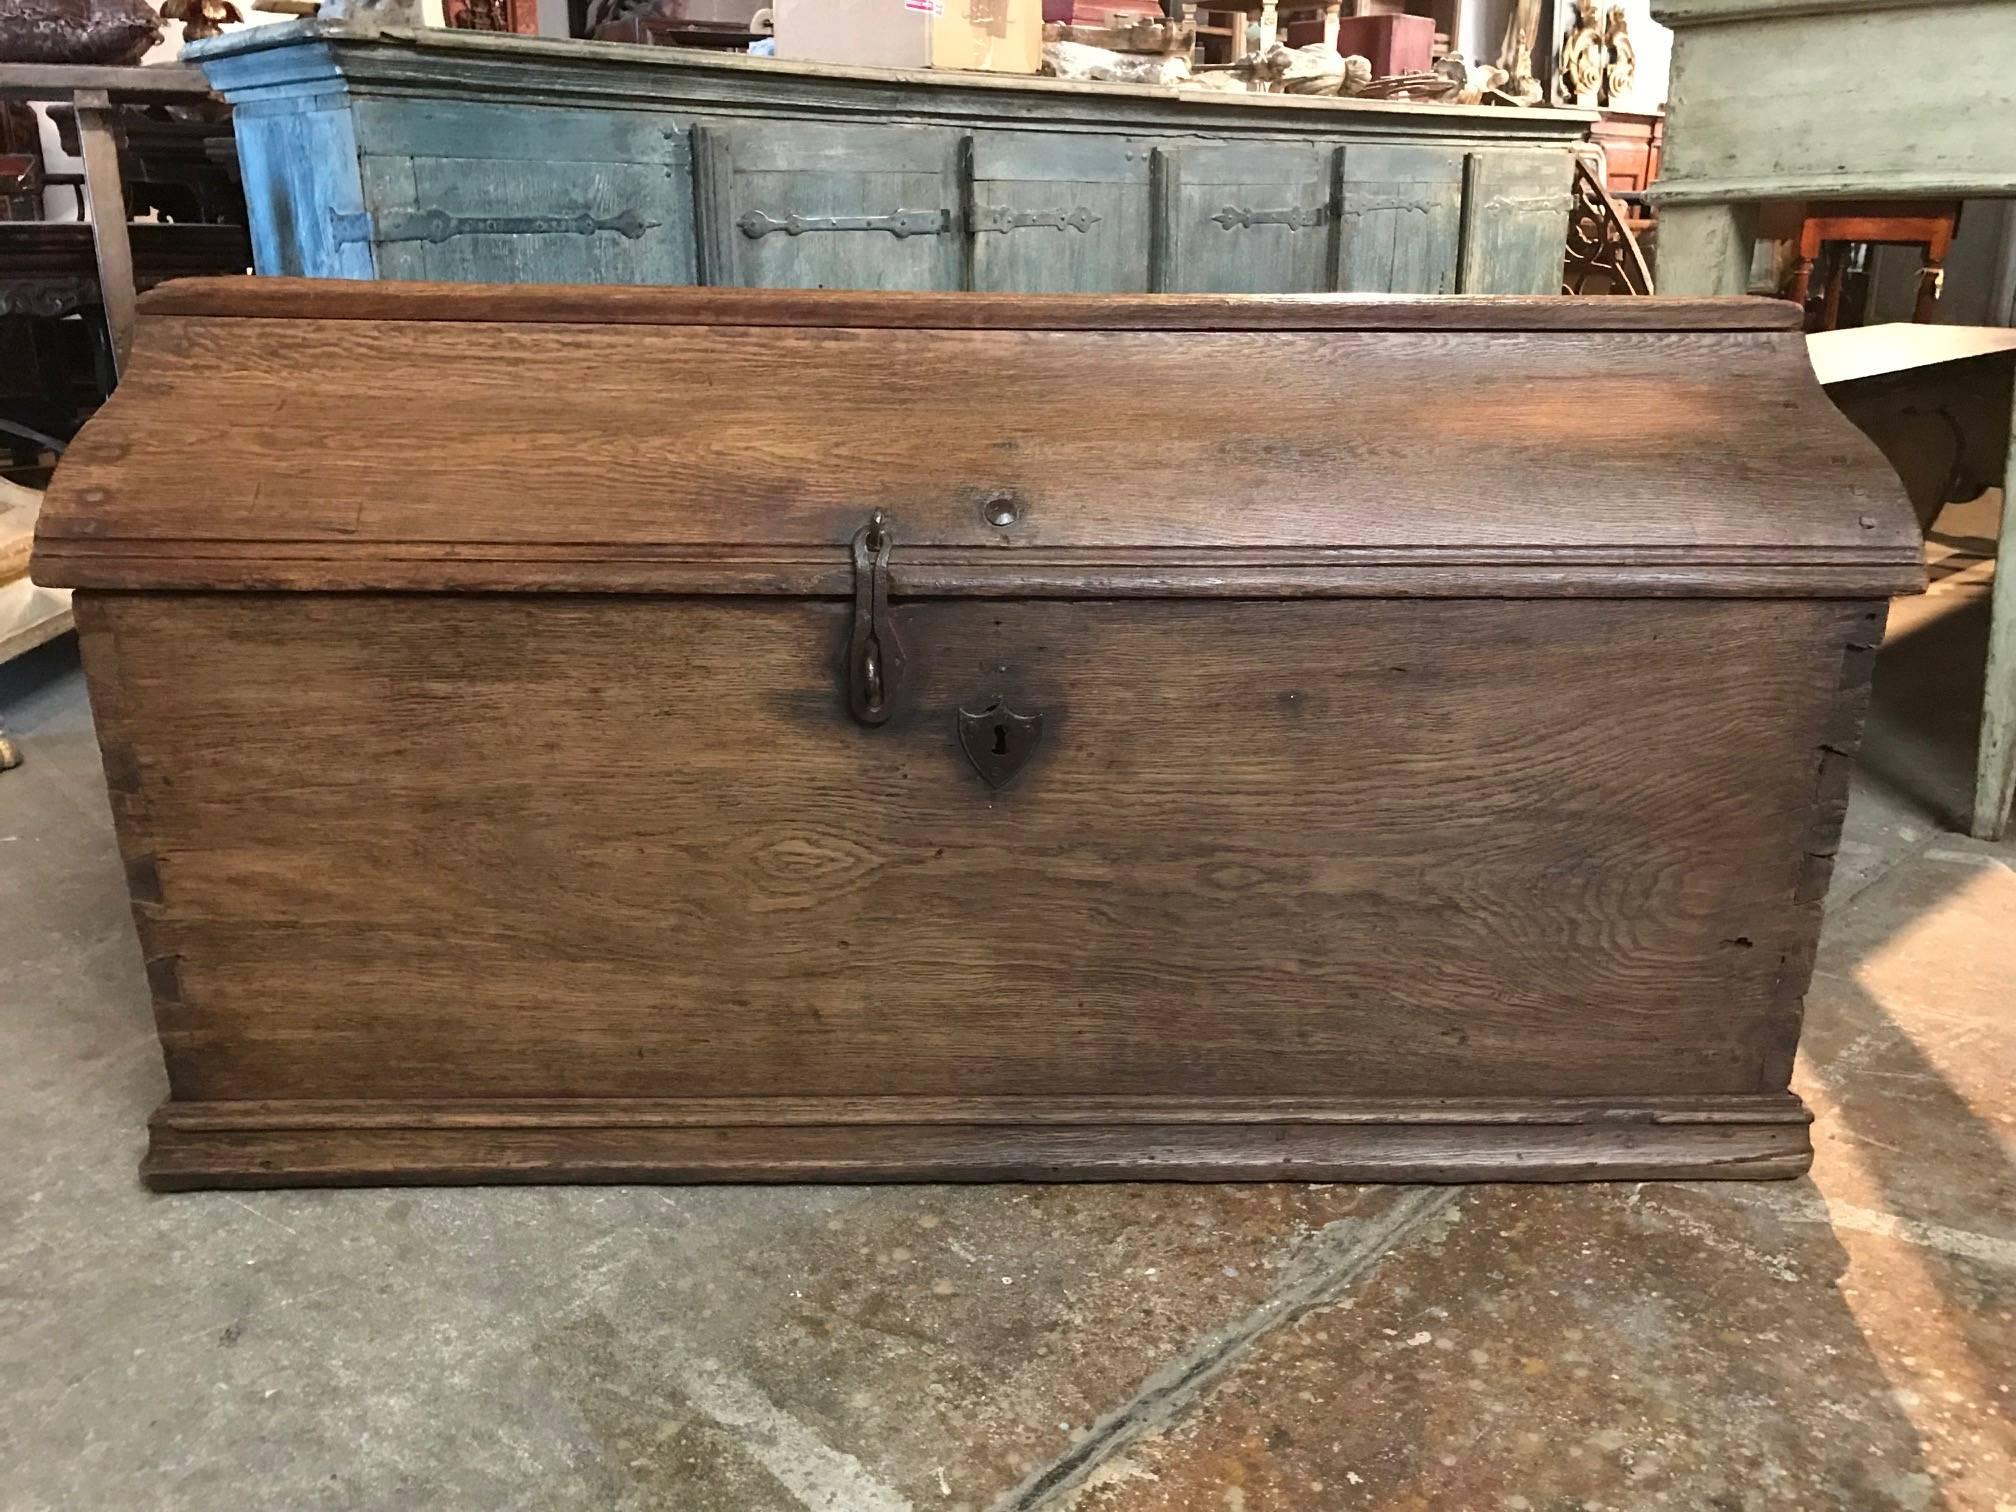 A very handsome later 17th century Coffre - or trunk - from The Netherlands.  Wonderfully constructed with solid boards of beautifully patina'd oak and iron hardware.  Perfect at the foot of a bed or under a picture window.